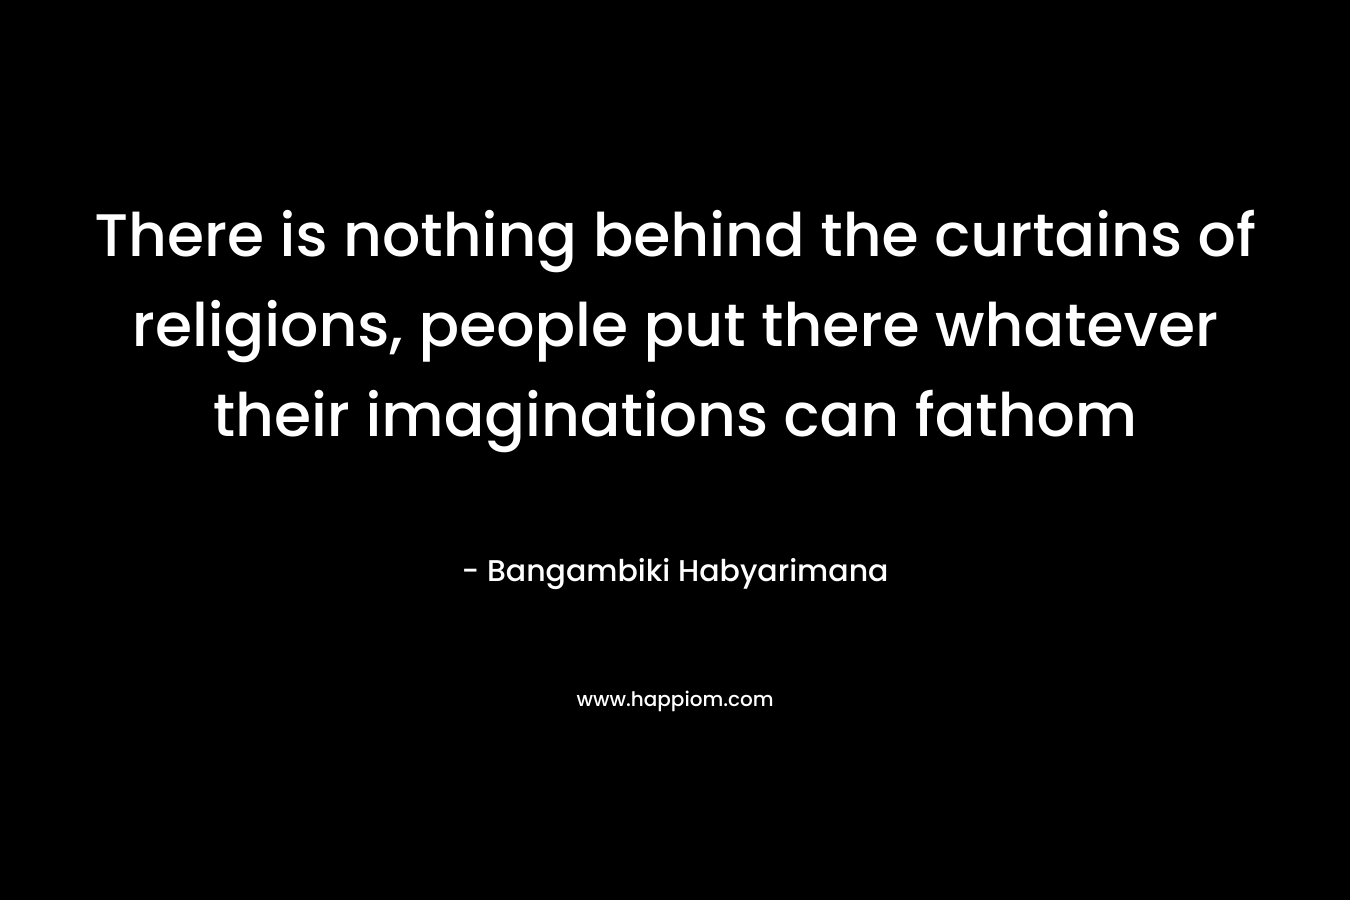 There is nothing behind the curtains of religions, people put there whatever their imaginations can fathom